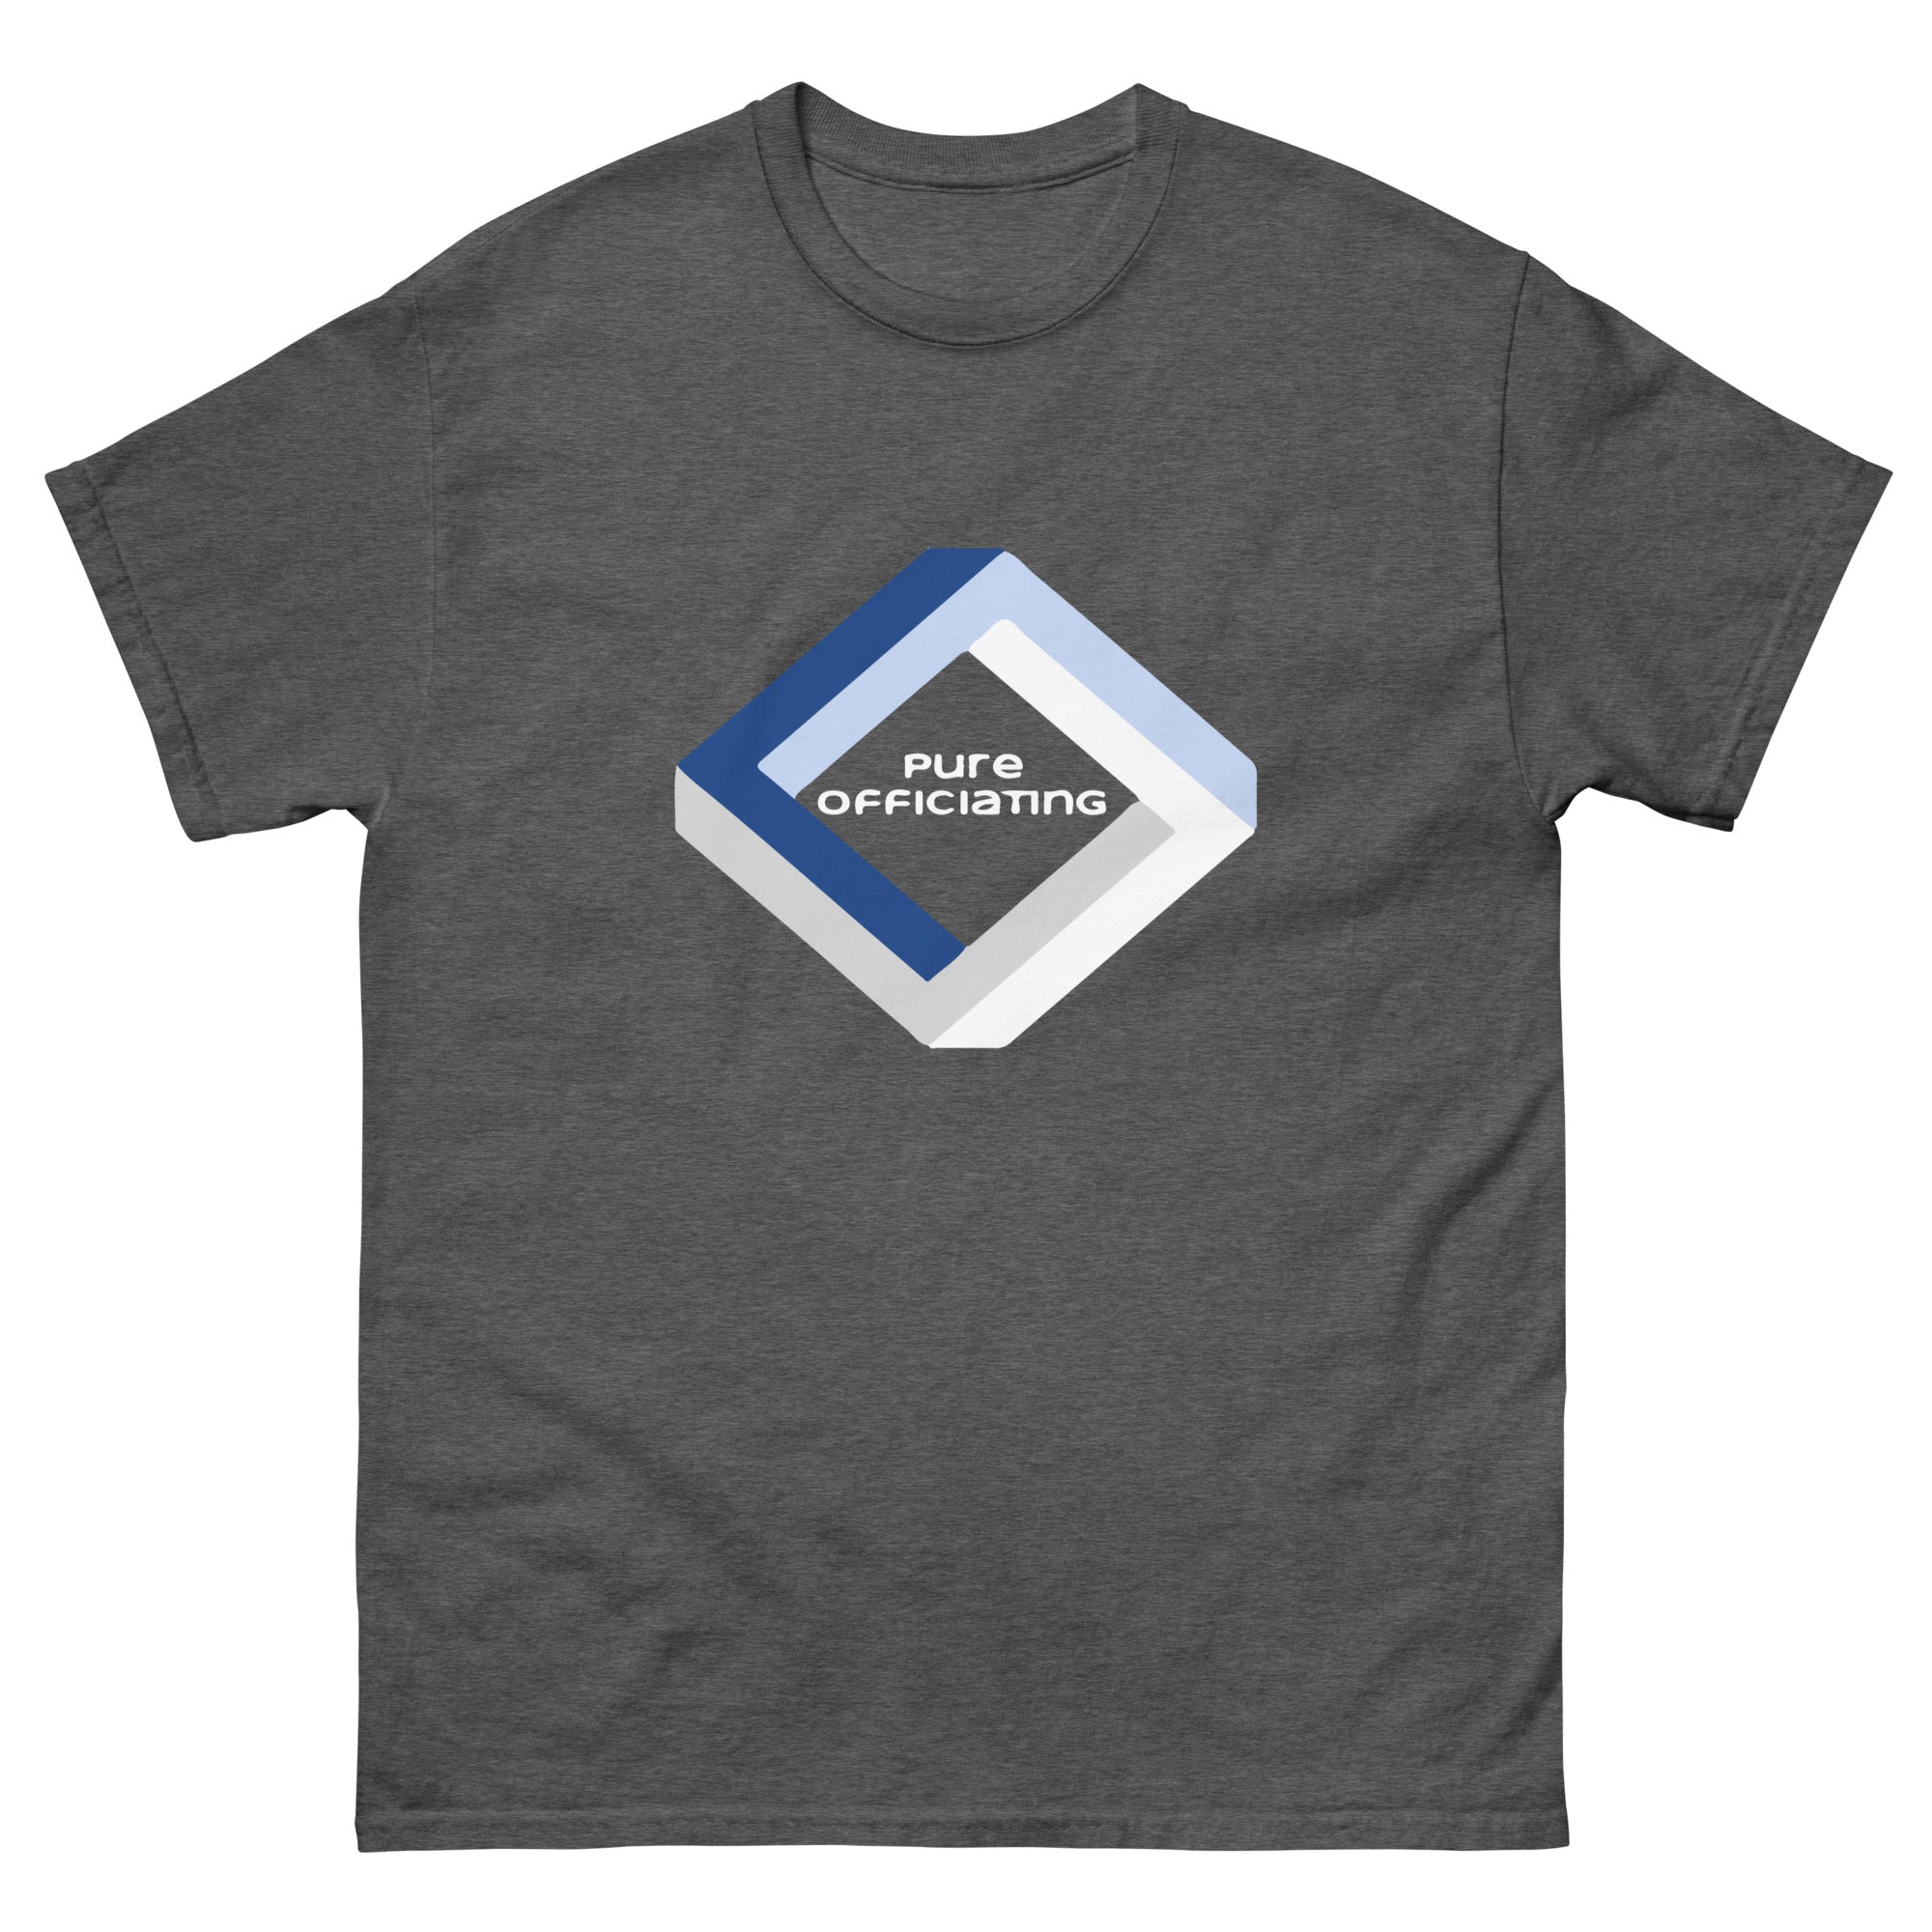 PURE OFFICIATING Men's classic tee V2